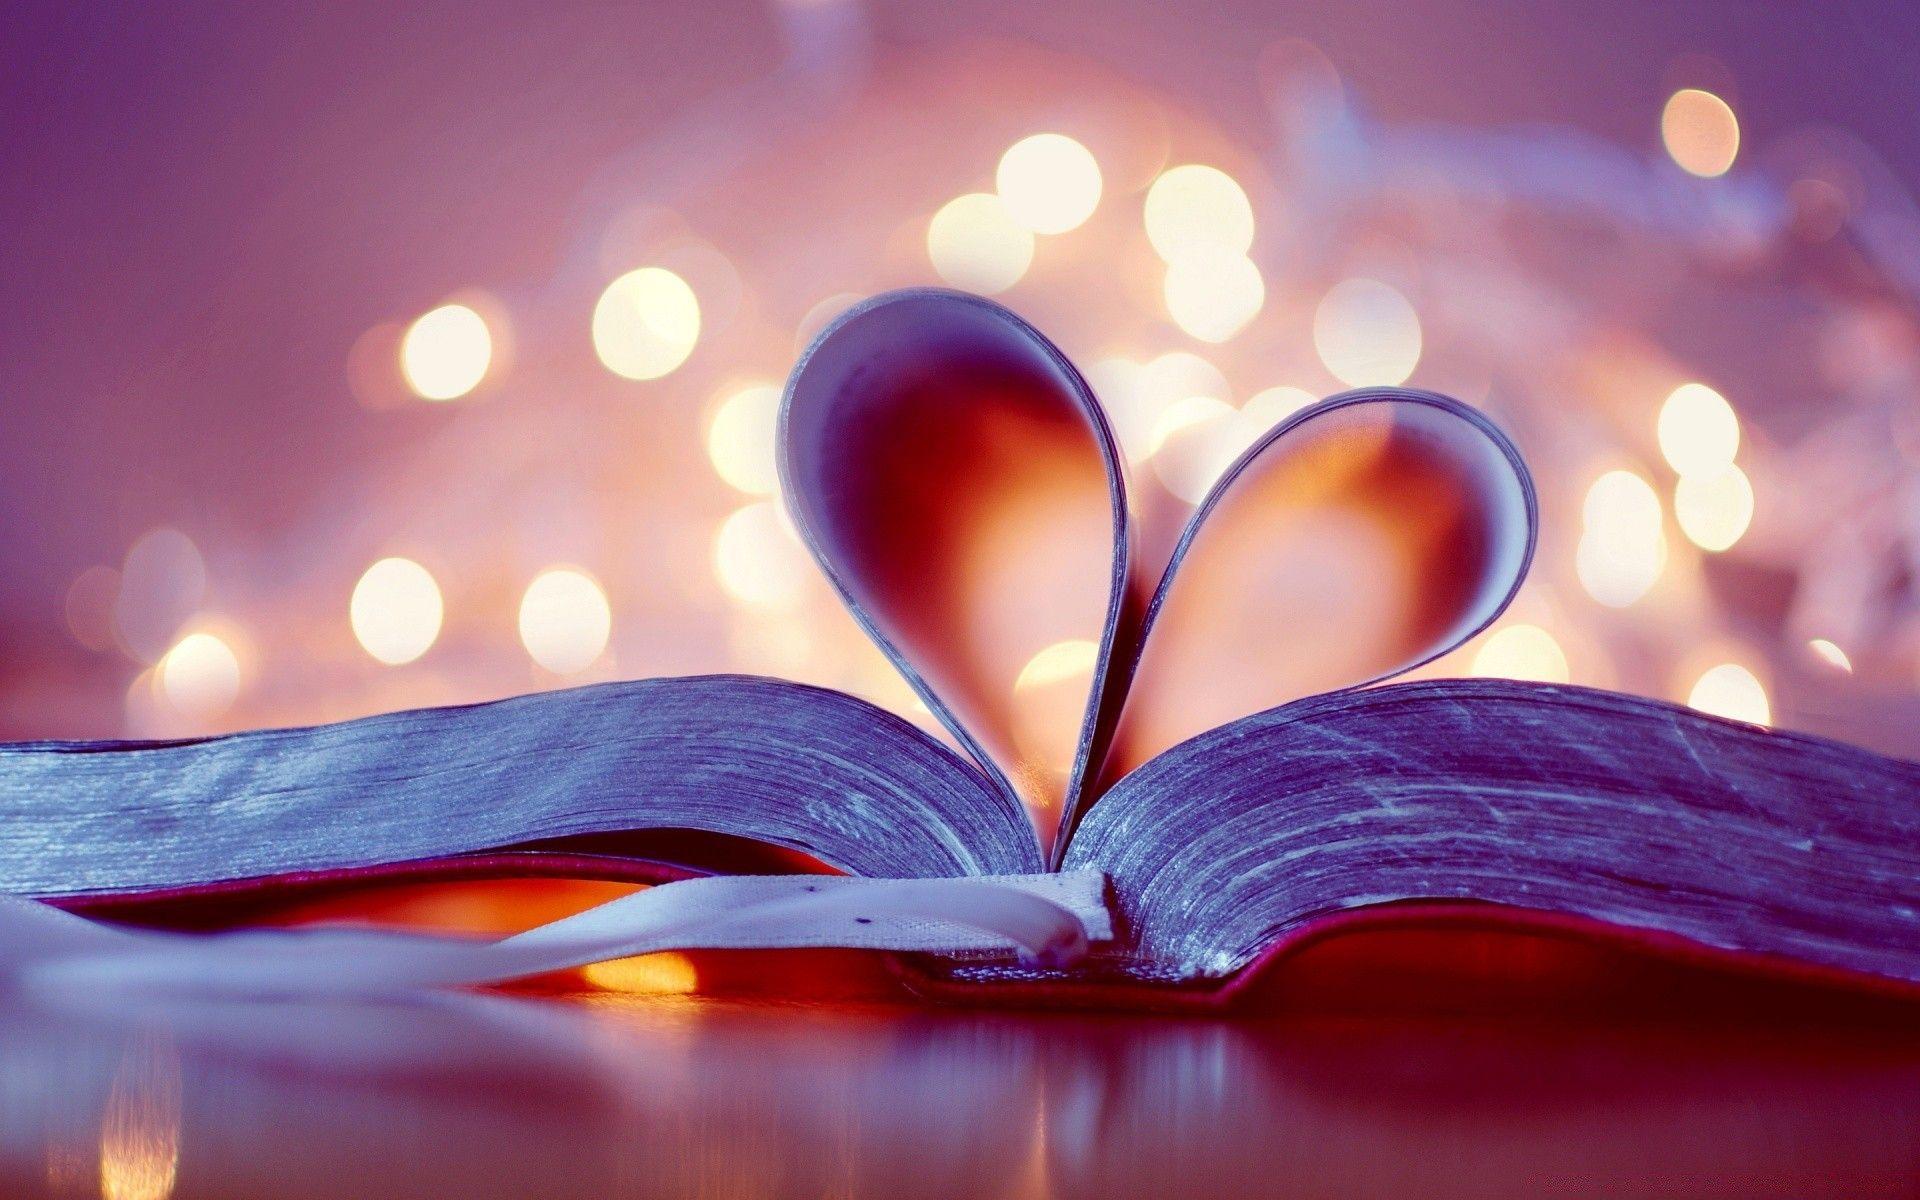 Heart Book. iPhone wallpaper for free